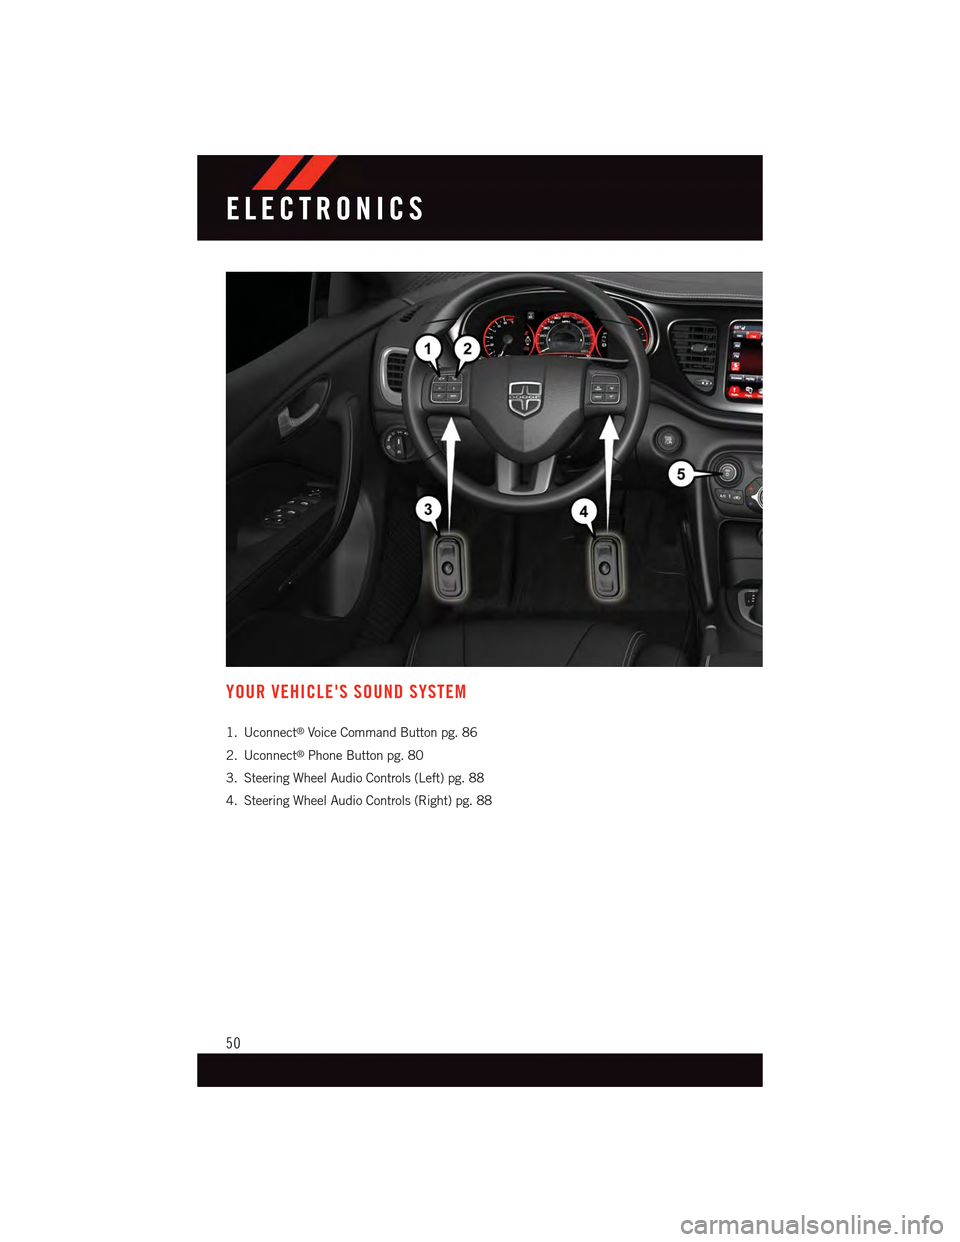 DODGE DART 2015 PF / 1.G Workshop Manual YOUR VEHICLES SOUND SYSTEM
1. Uconnect®Voice Command Button pg. 86
2. Uconnect®Phone Button pg. 80
3. Steering Wheel Audio Controls (Left) pg. 88
4. Steering Wheel Audio Controls (Right) pg. 88
ELE